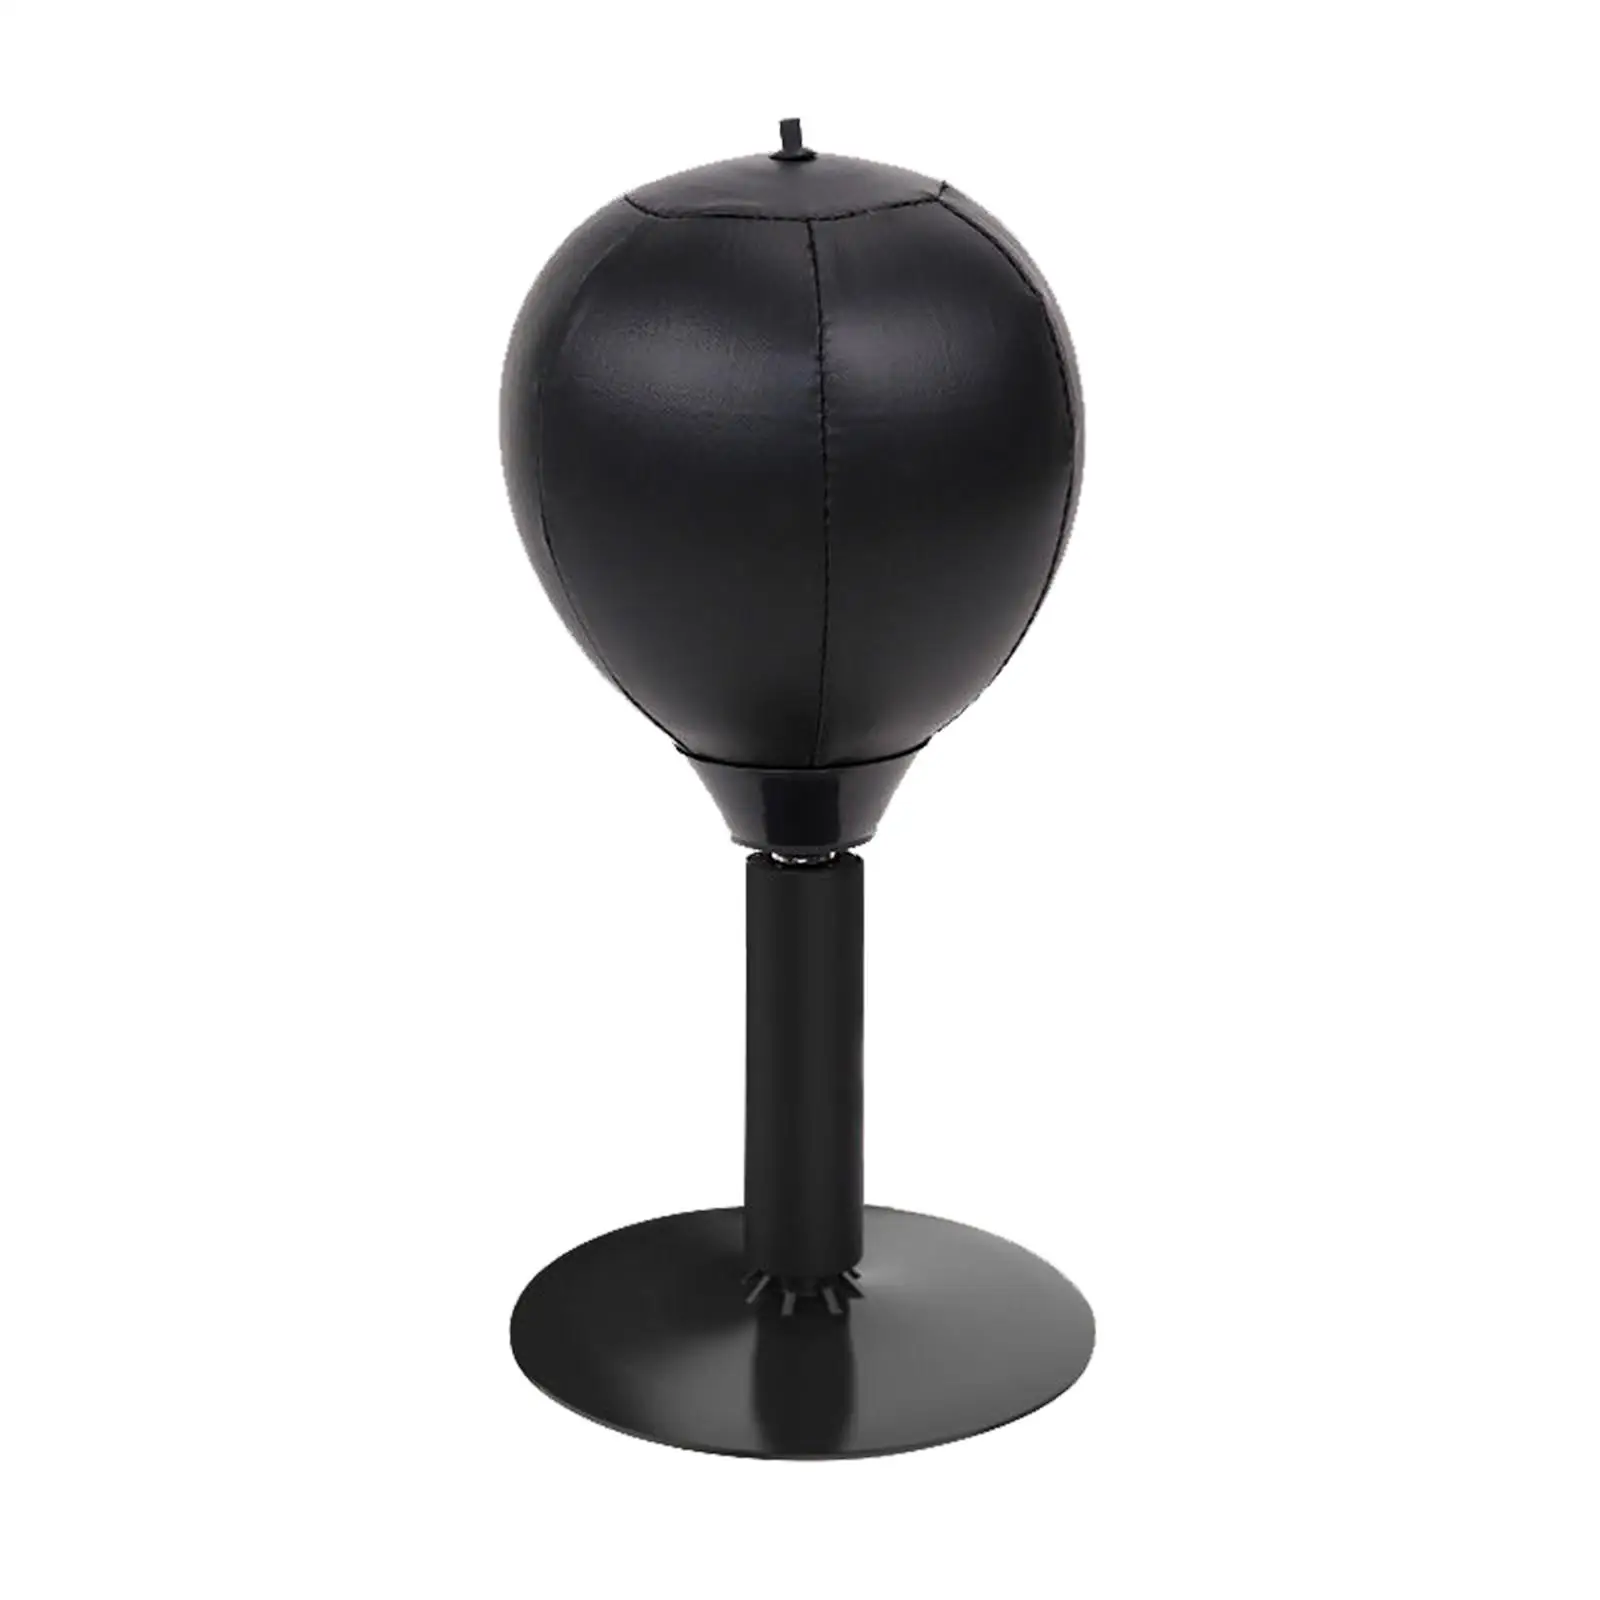 Punching Bag Decompression Toys Speed Ball Bags Freestanding Suction Cup Desktop